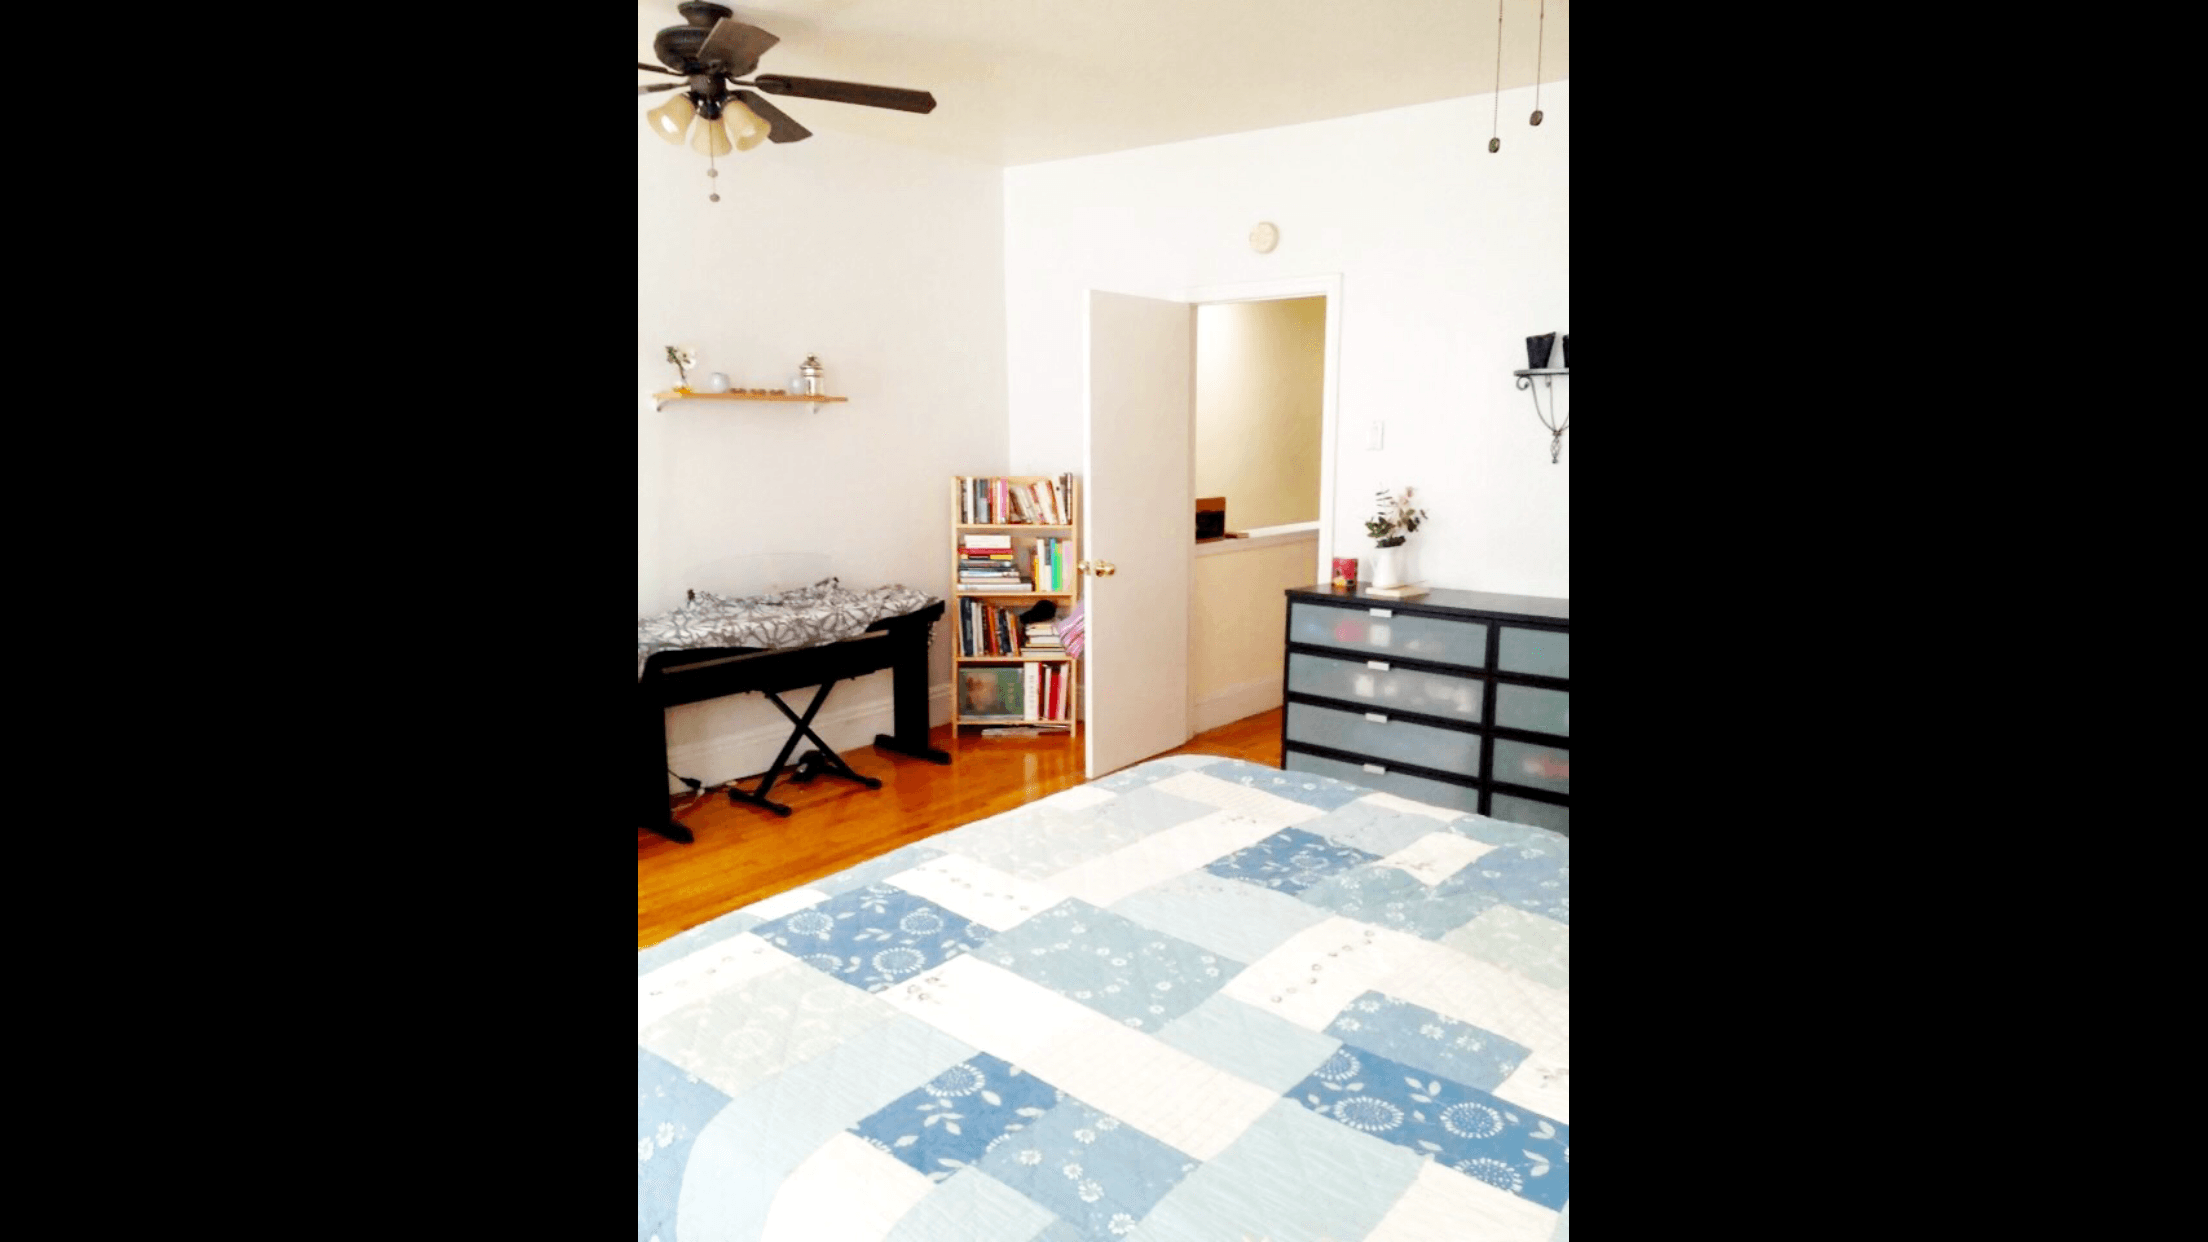 Fantastic 1BR **All Utilities Included** Prime Prospect/Crown Heights Location. Steps From Franklin Ave